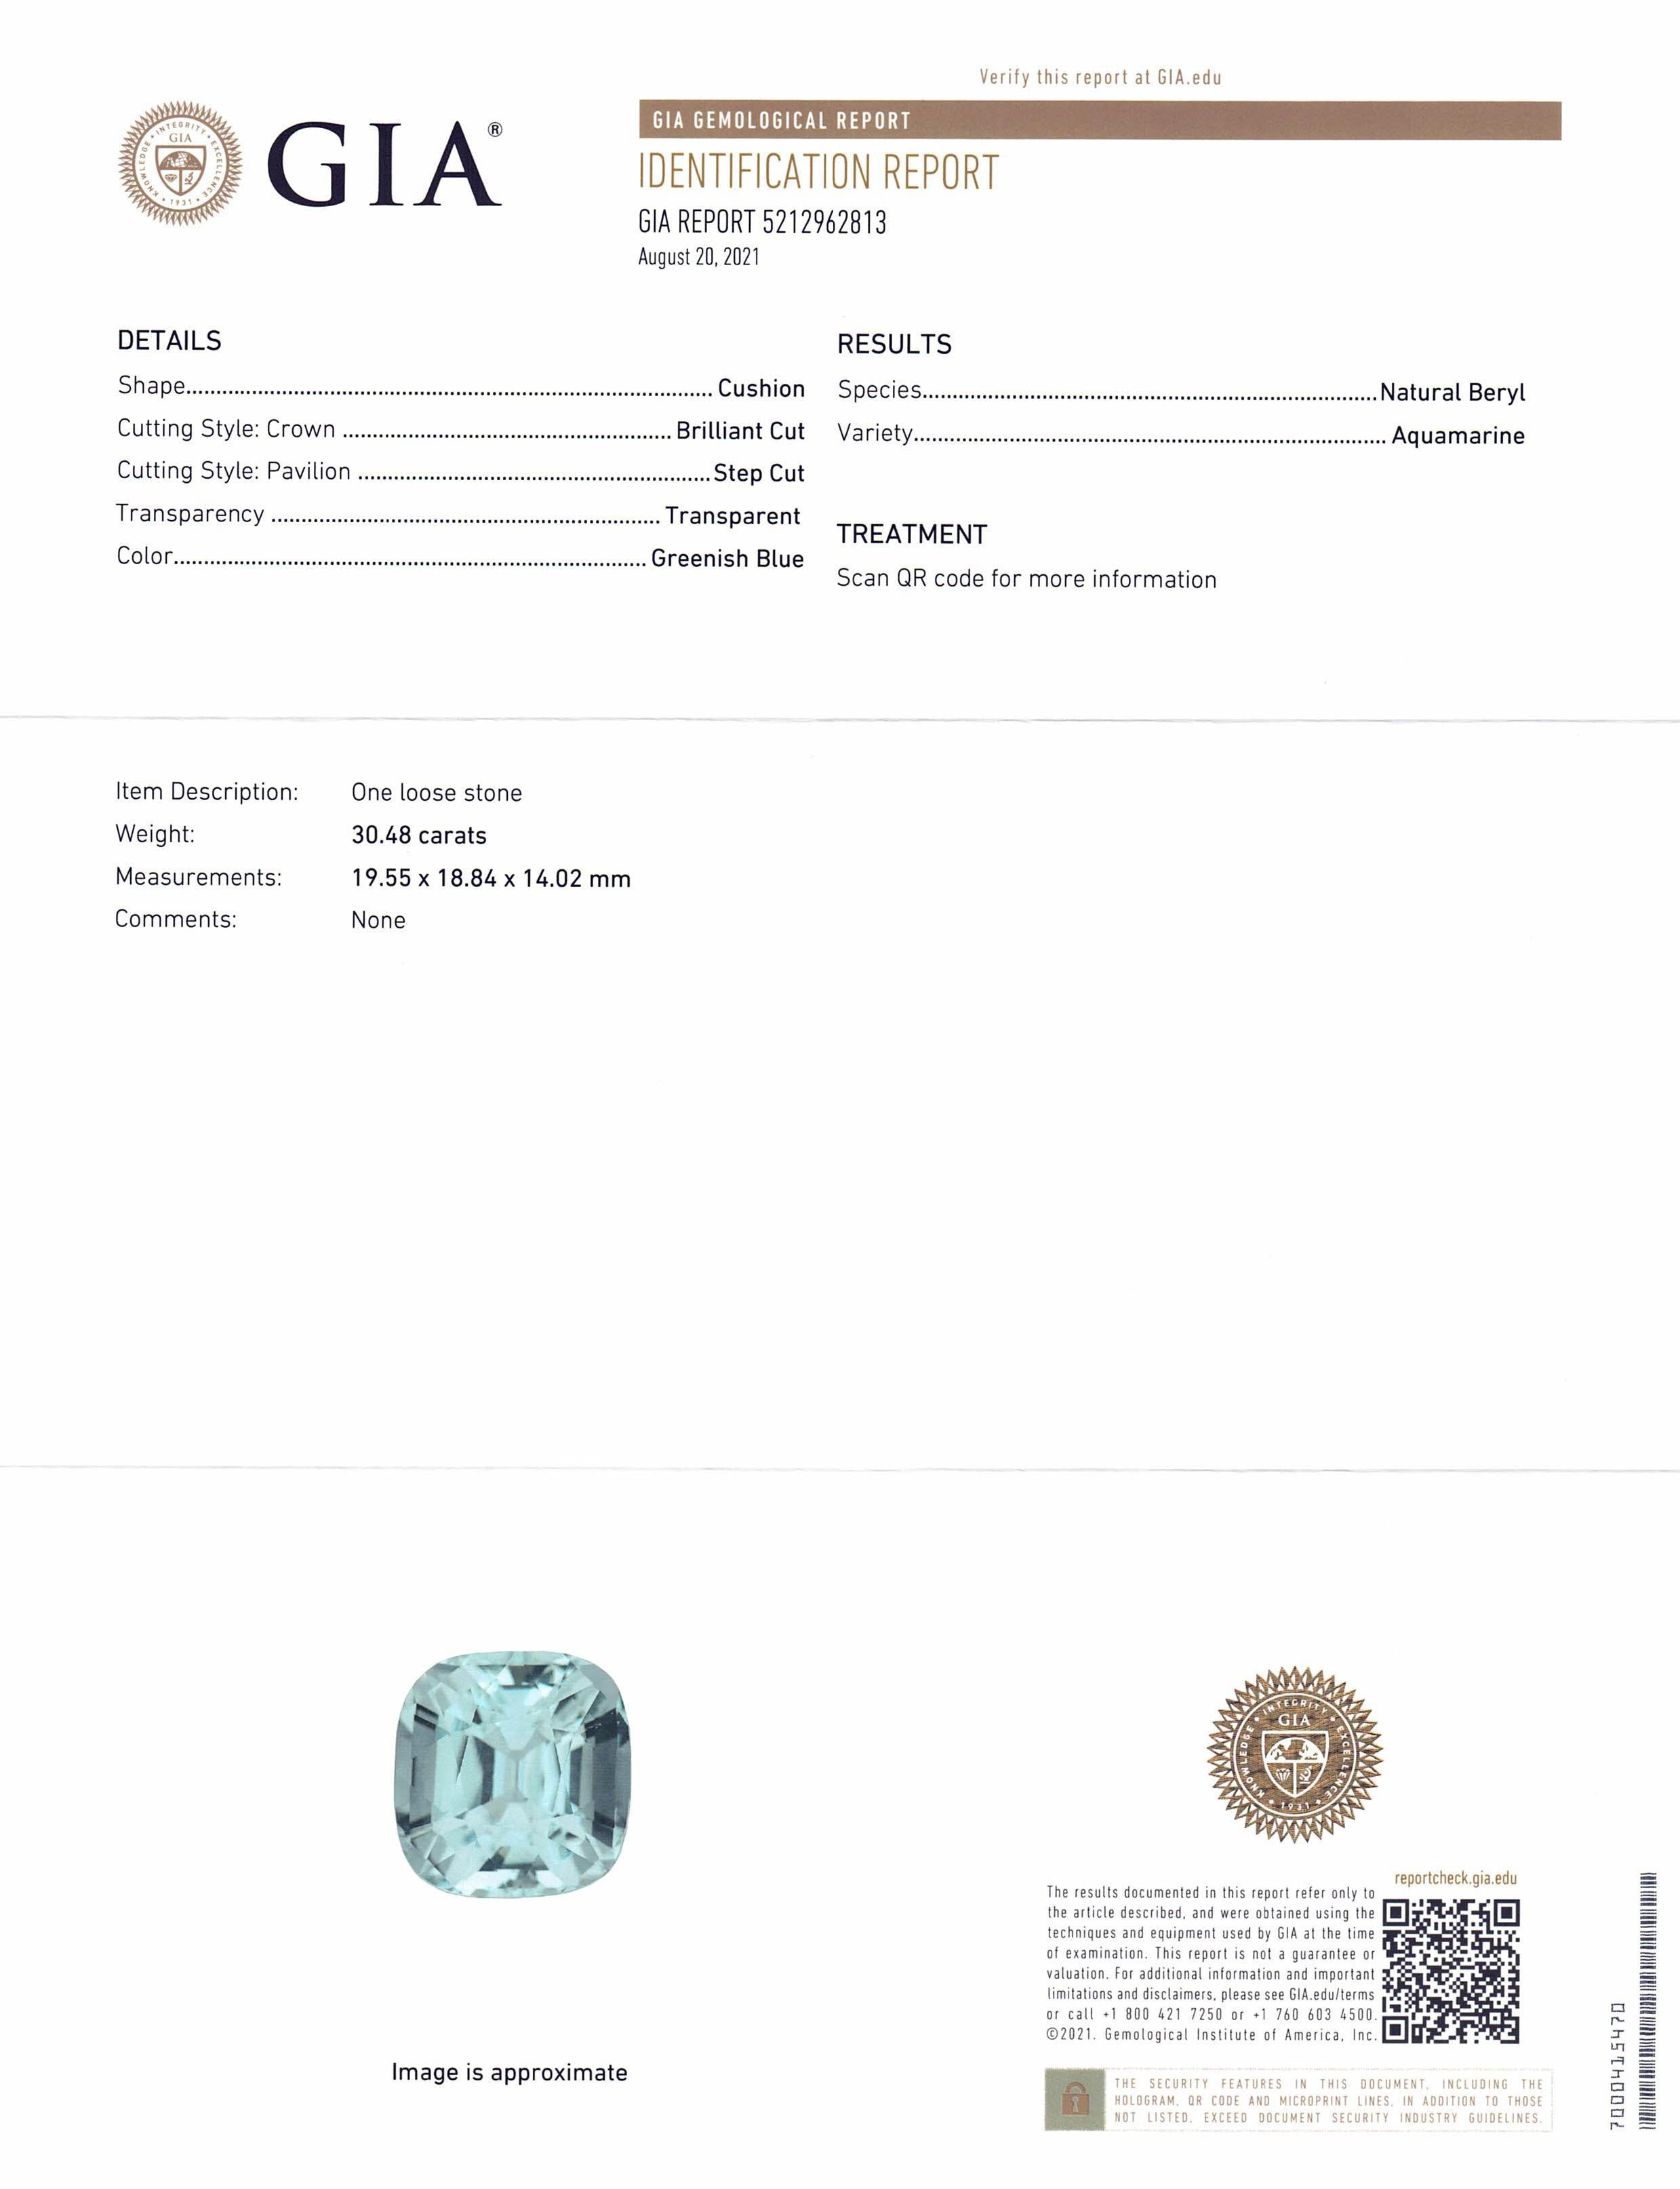 This is a stunning GIA Certified Aquamarine

 

The GIA report reads as follows:

GIA Report Number: 5212962813
Shape: Cushion
Cutting Style:
Cutting Style: Crown: Brilliant Cut
Cutting Style: Pavilion: Step Cut
Transparency: Transparent
Color: